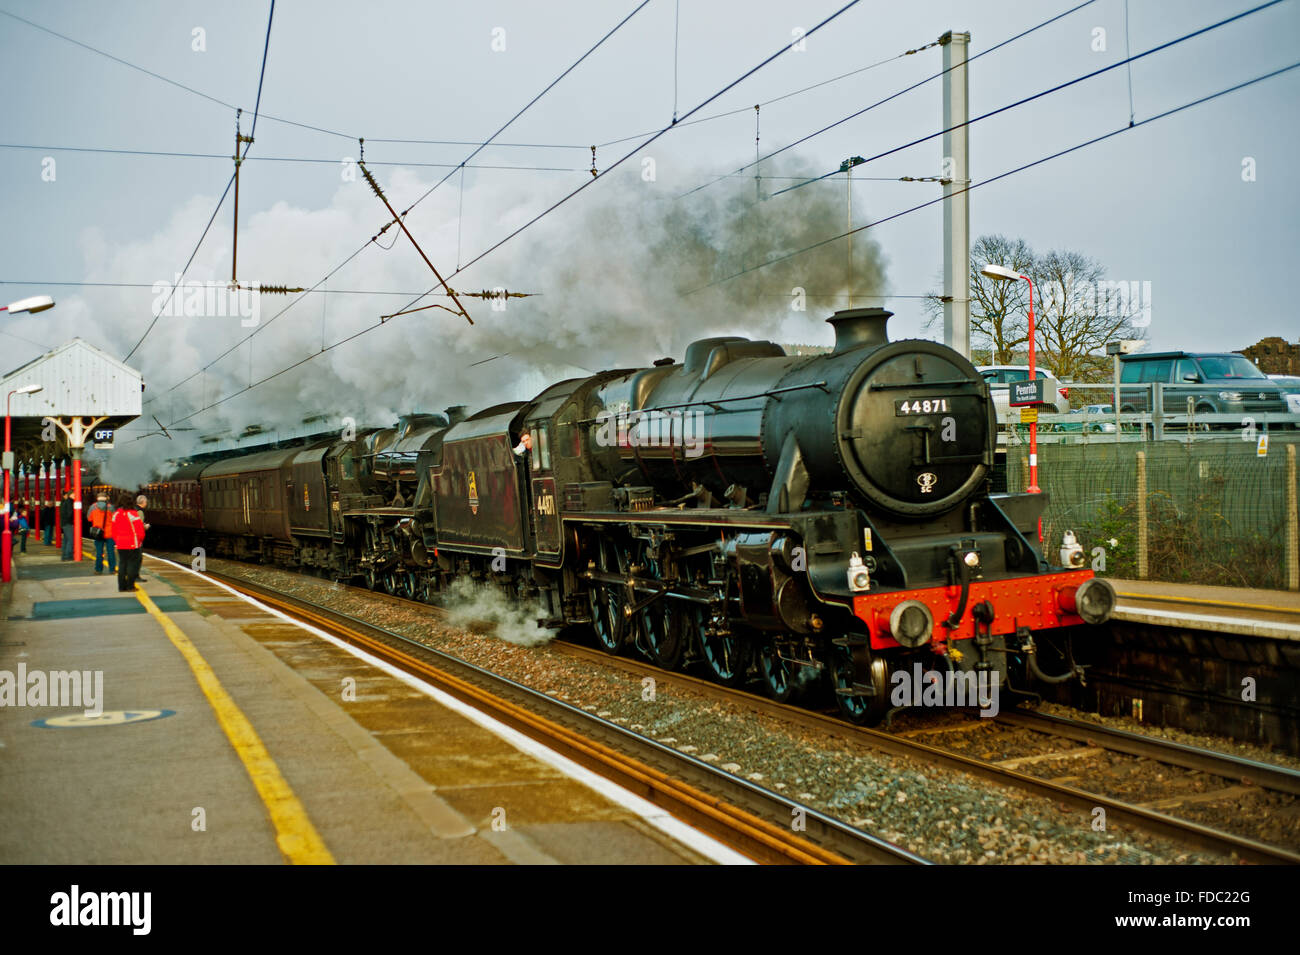 Black 5s Nos 45407 and 44871 at Penrith Stock Photo